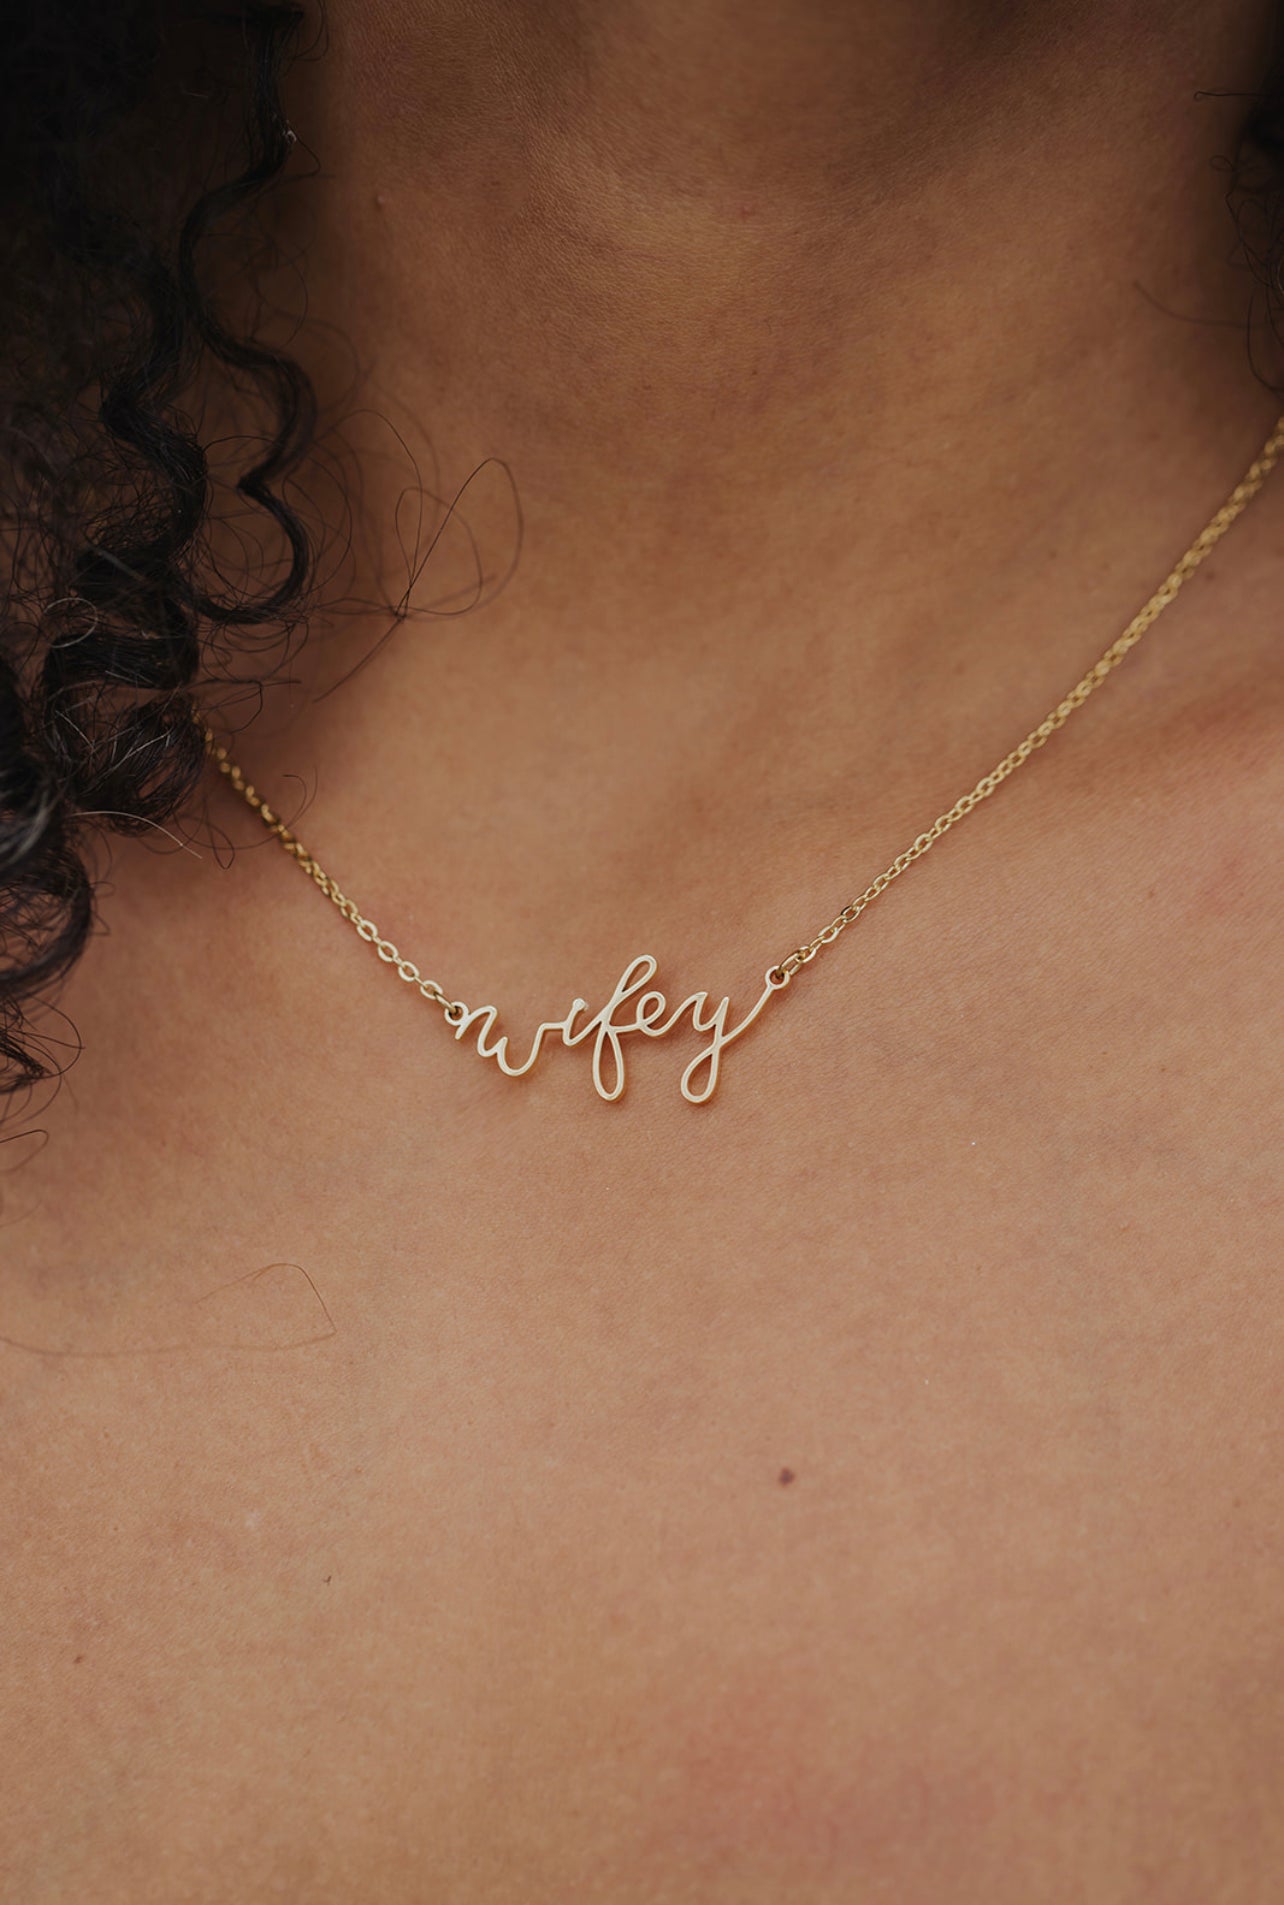 The Better Half "Wifey" Necklace